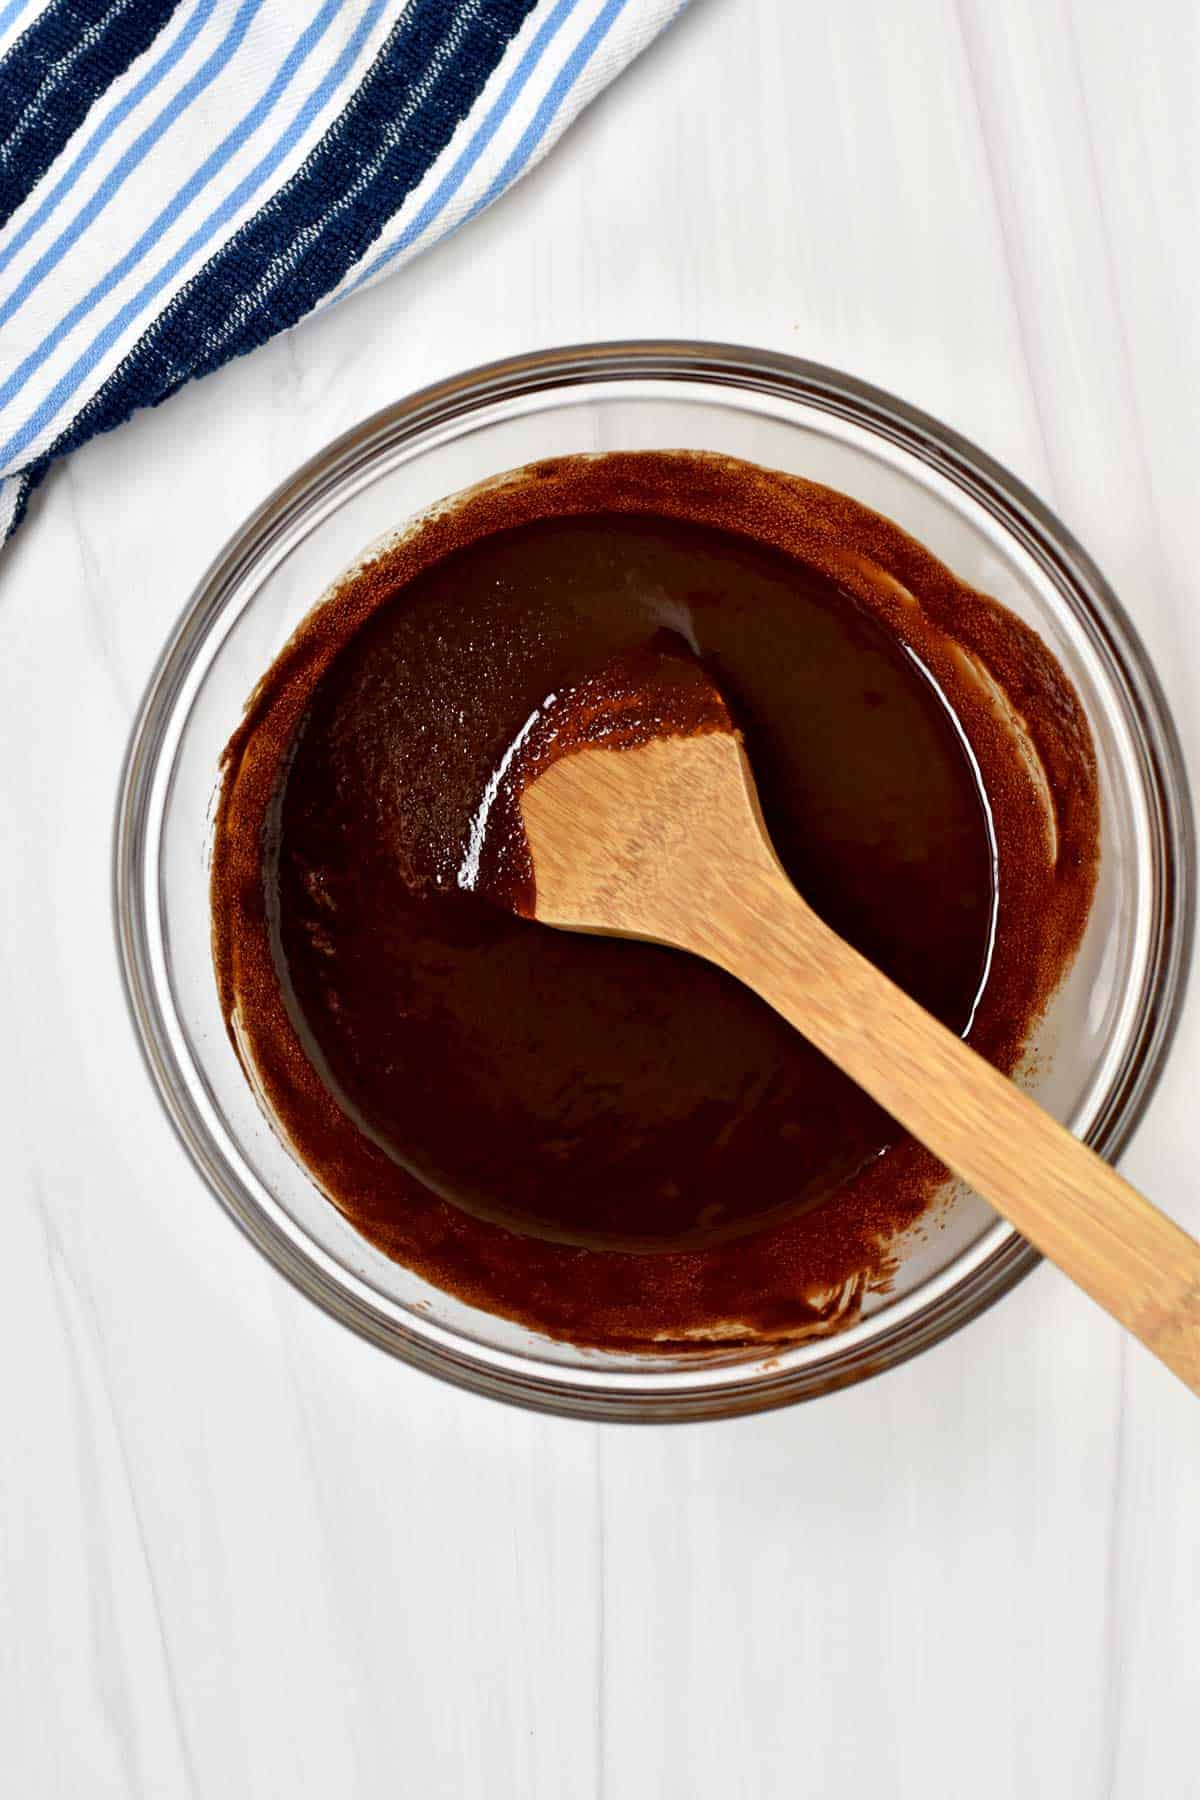 Melted butter, cocoa powder, and sugar stirred together in a glass mixing bowl.